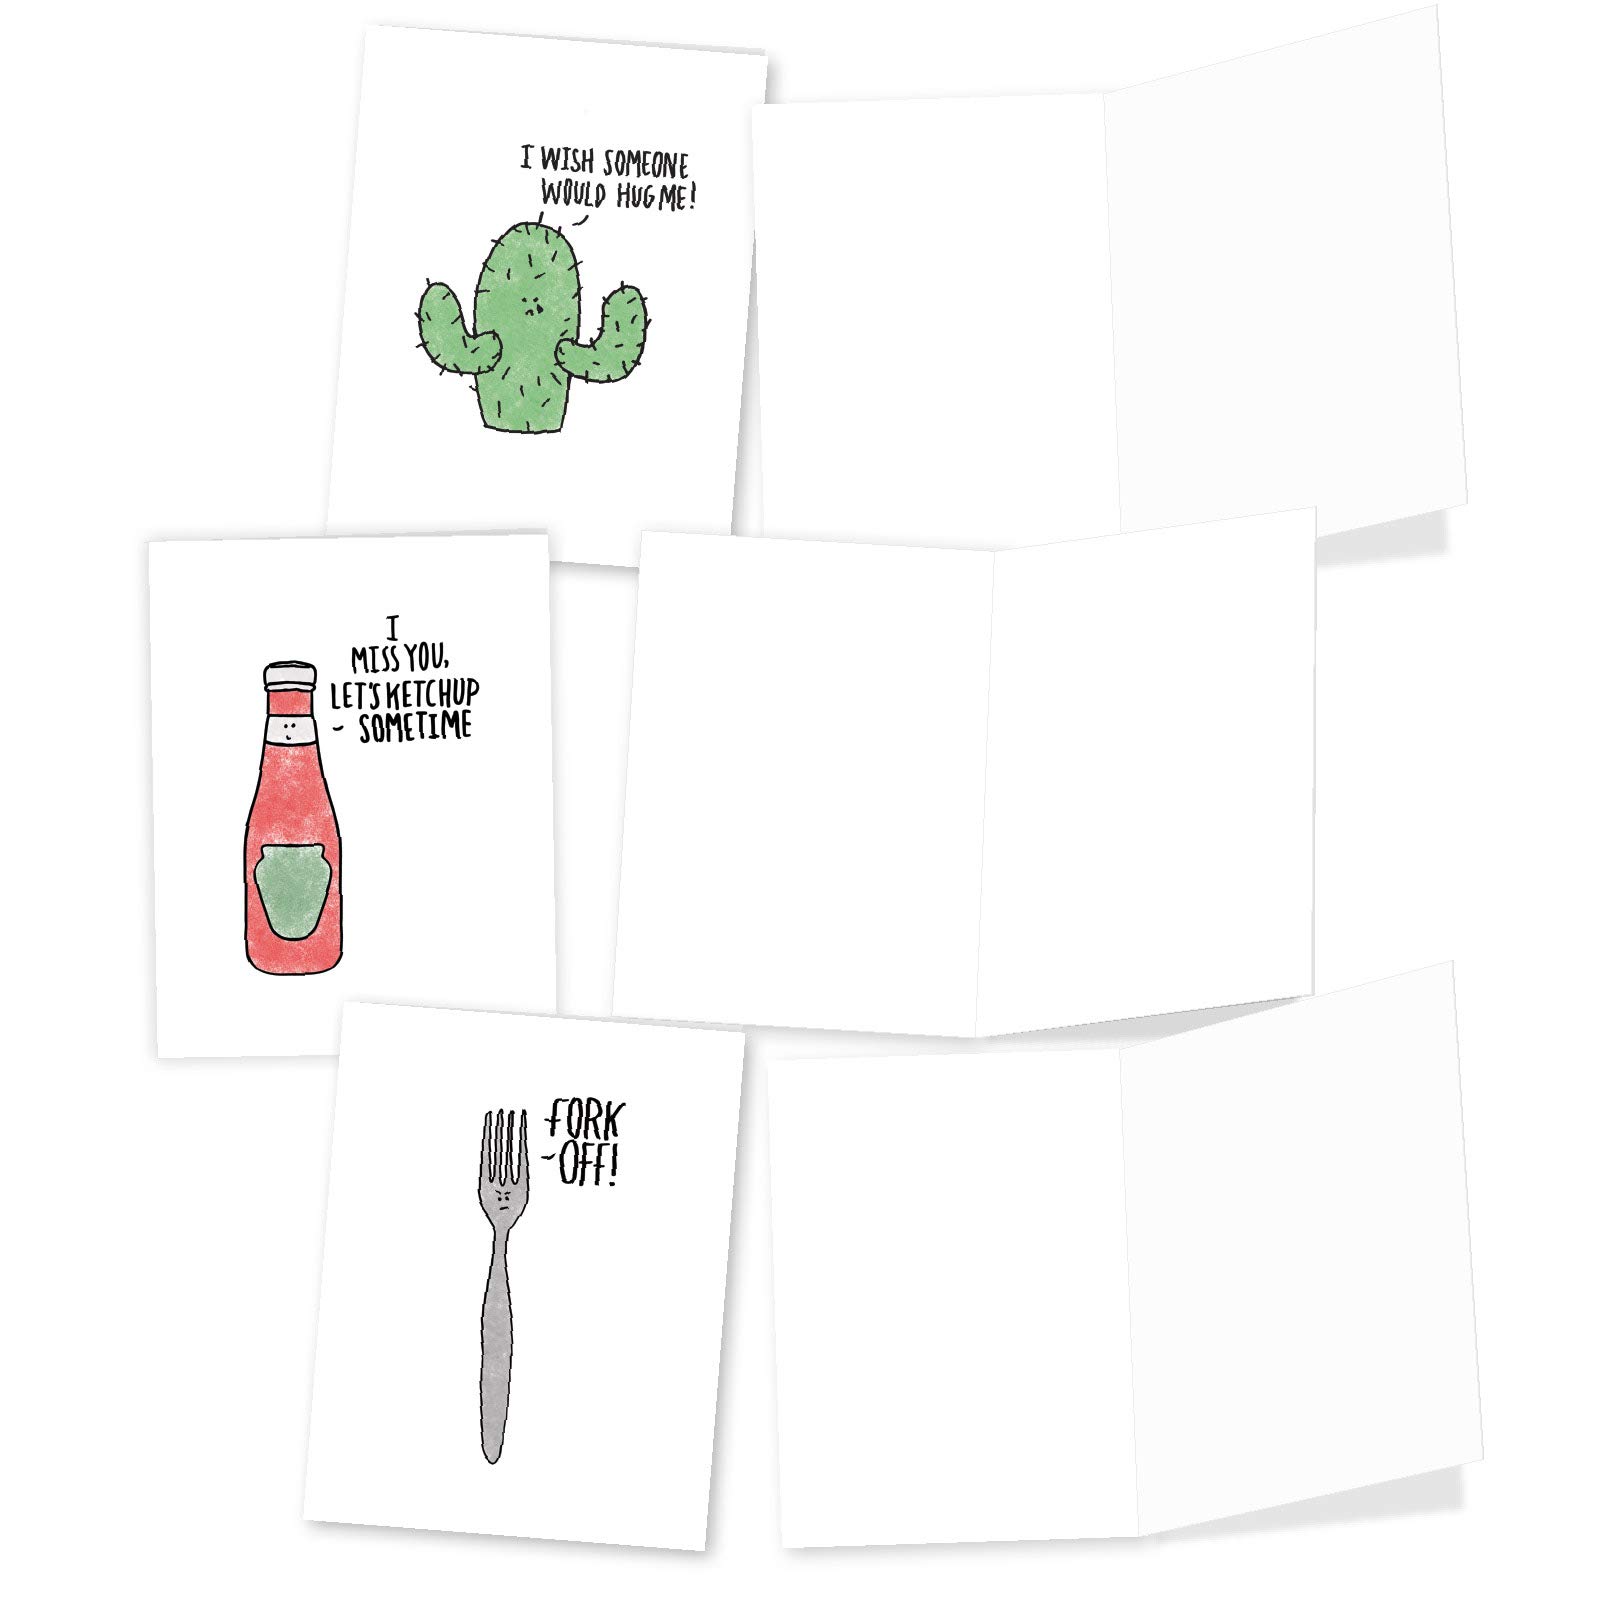 The Best Card Company - 10 Funny Assorted Blank Humor All Occasions Notecards Boxed Set 4 x 5.12 Inch w/ Envelopes Cute Word Play for Men, Women (10 Designs, 1 Each) - Fun Puns M2975OCB